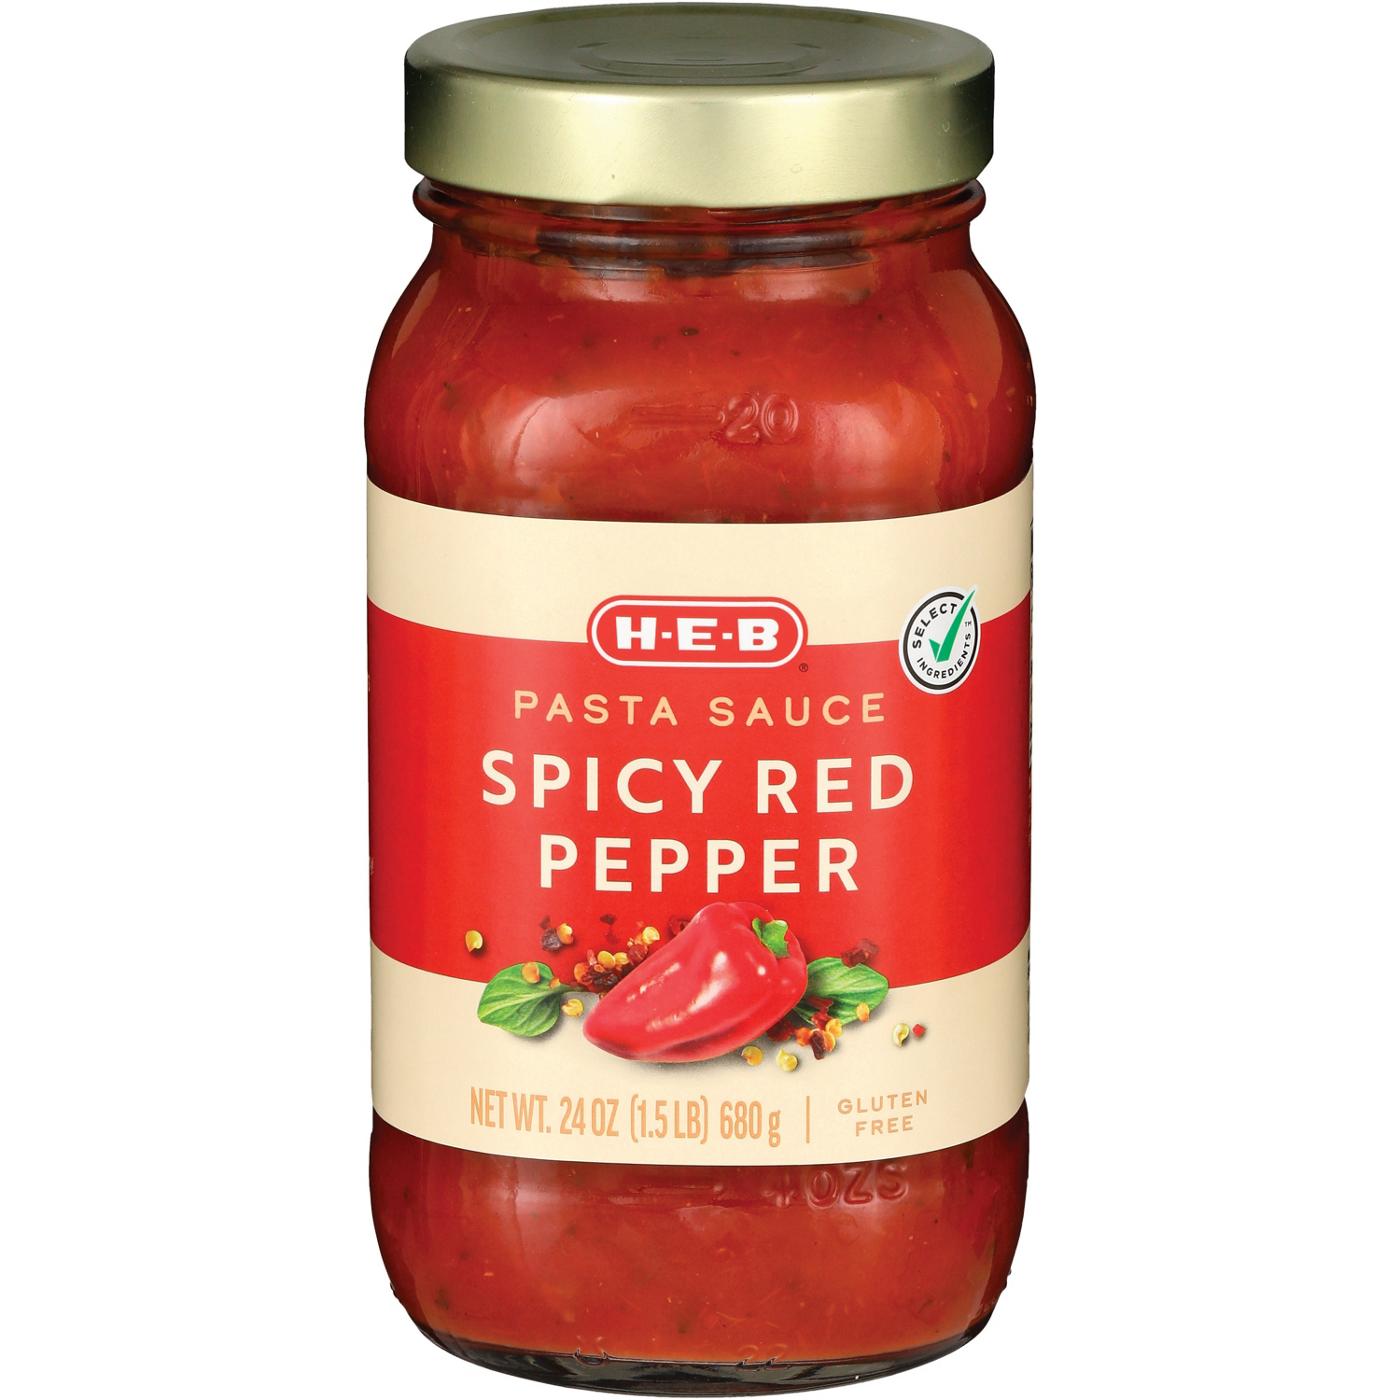 H-E-B Spicy Red Pepper Pasta Sauce; image 2 of 2